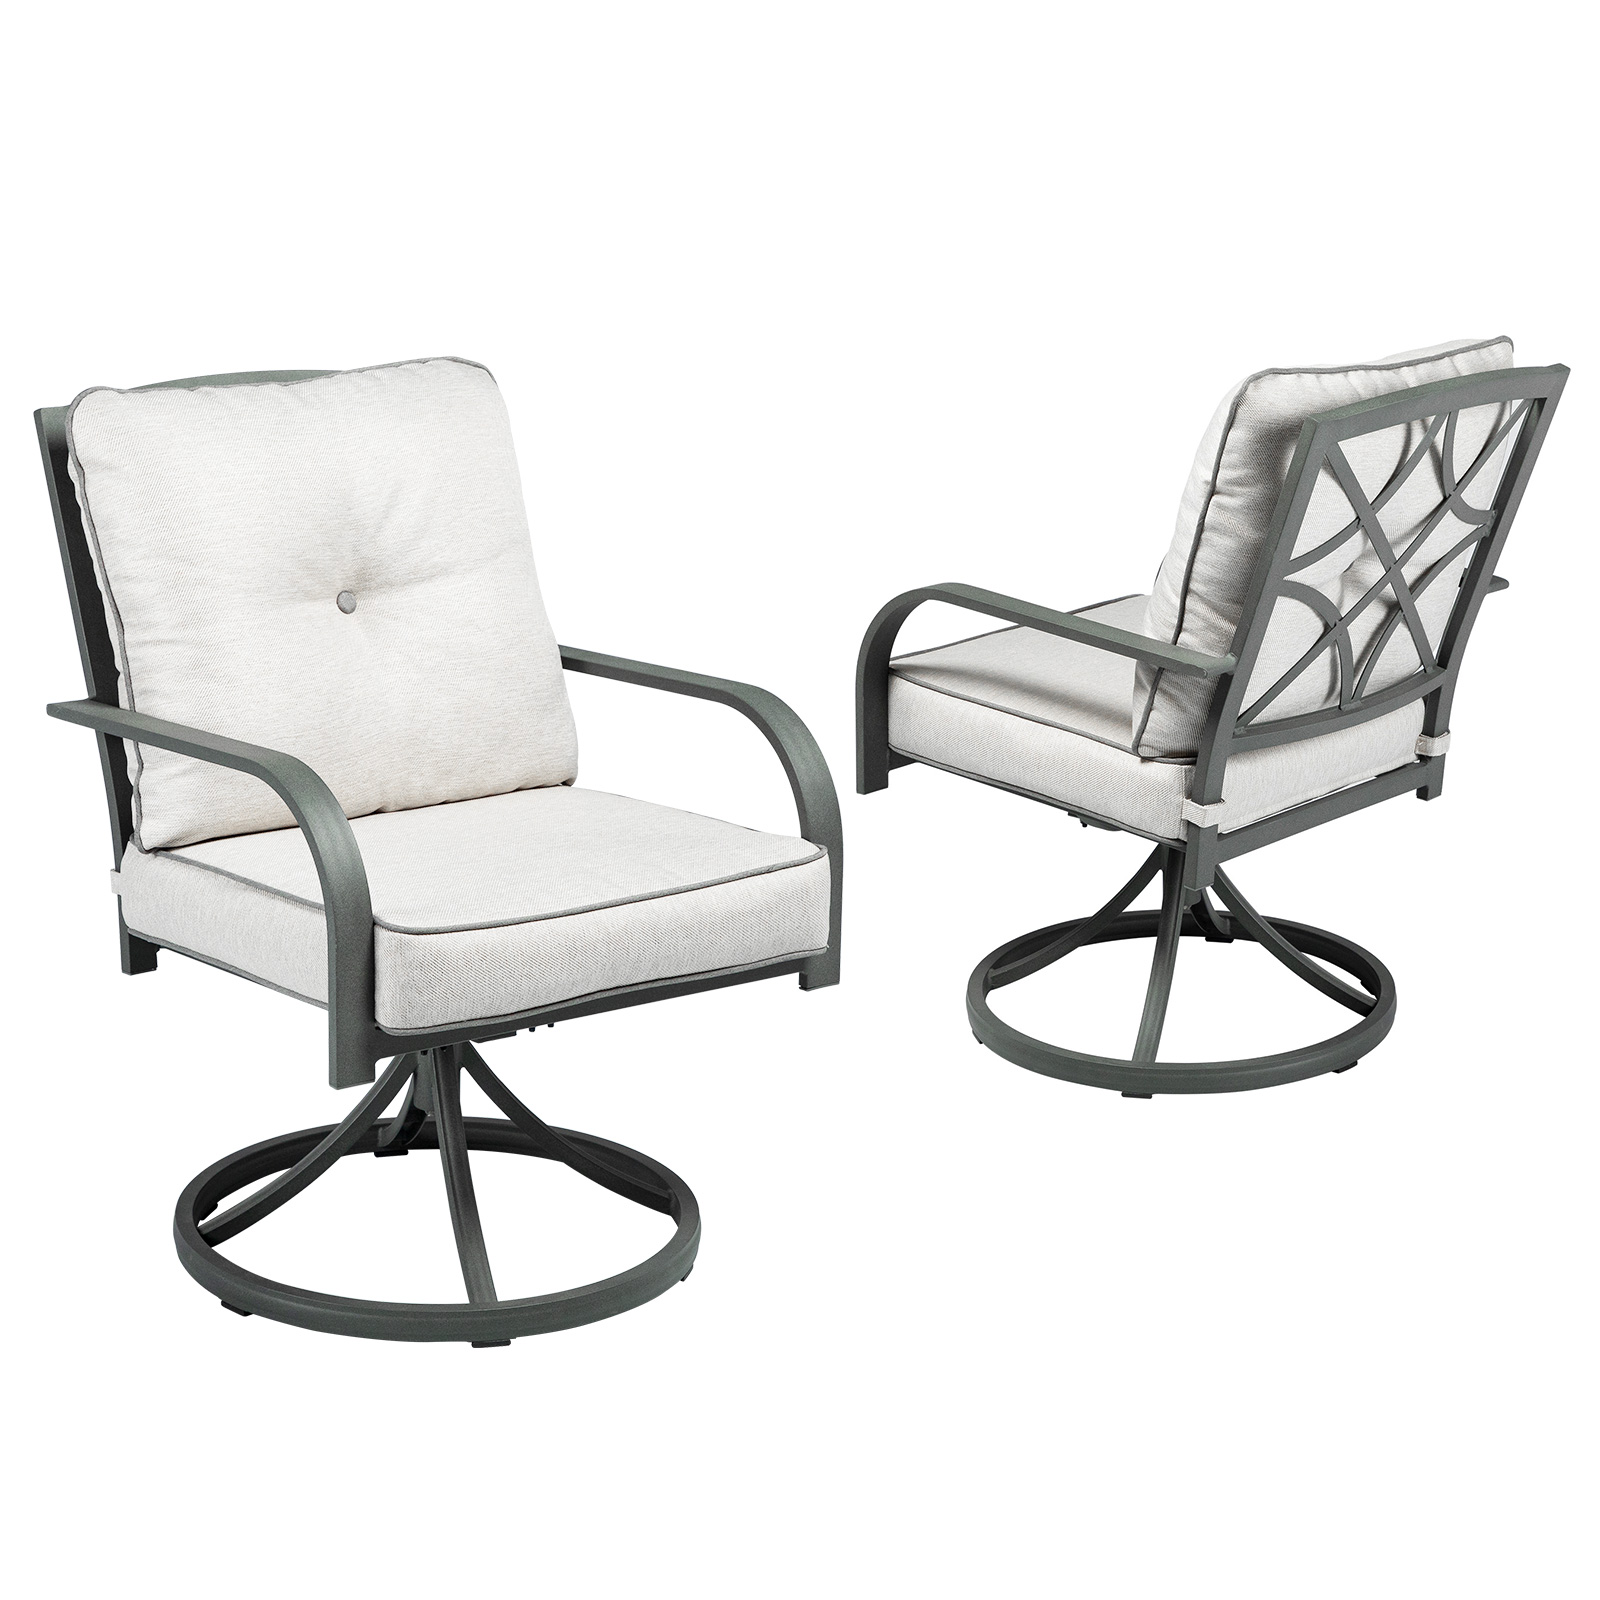 Outdoor cast aluminum patio swivel chair with cushion - Set of 2 (black frame  beige cushion)